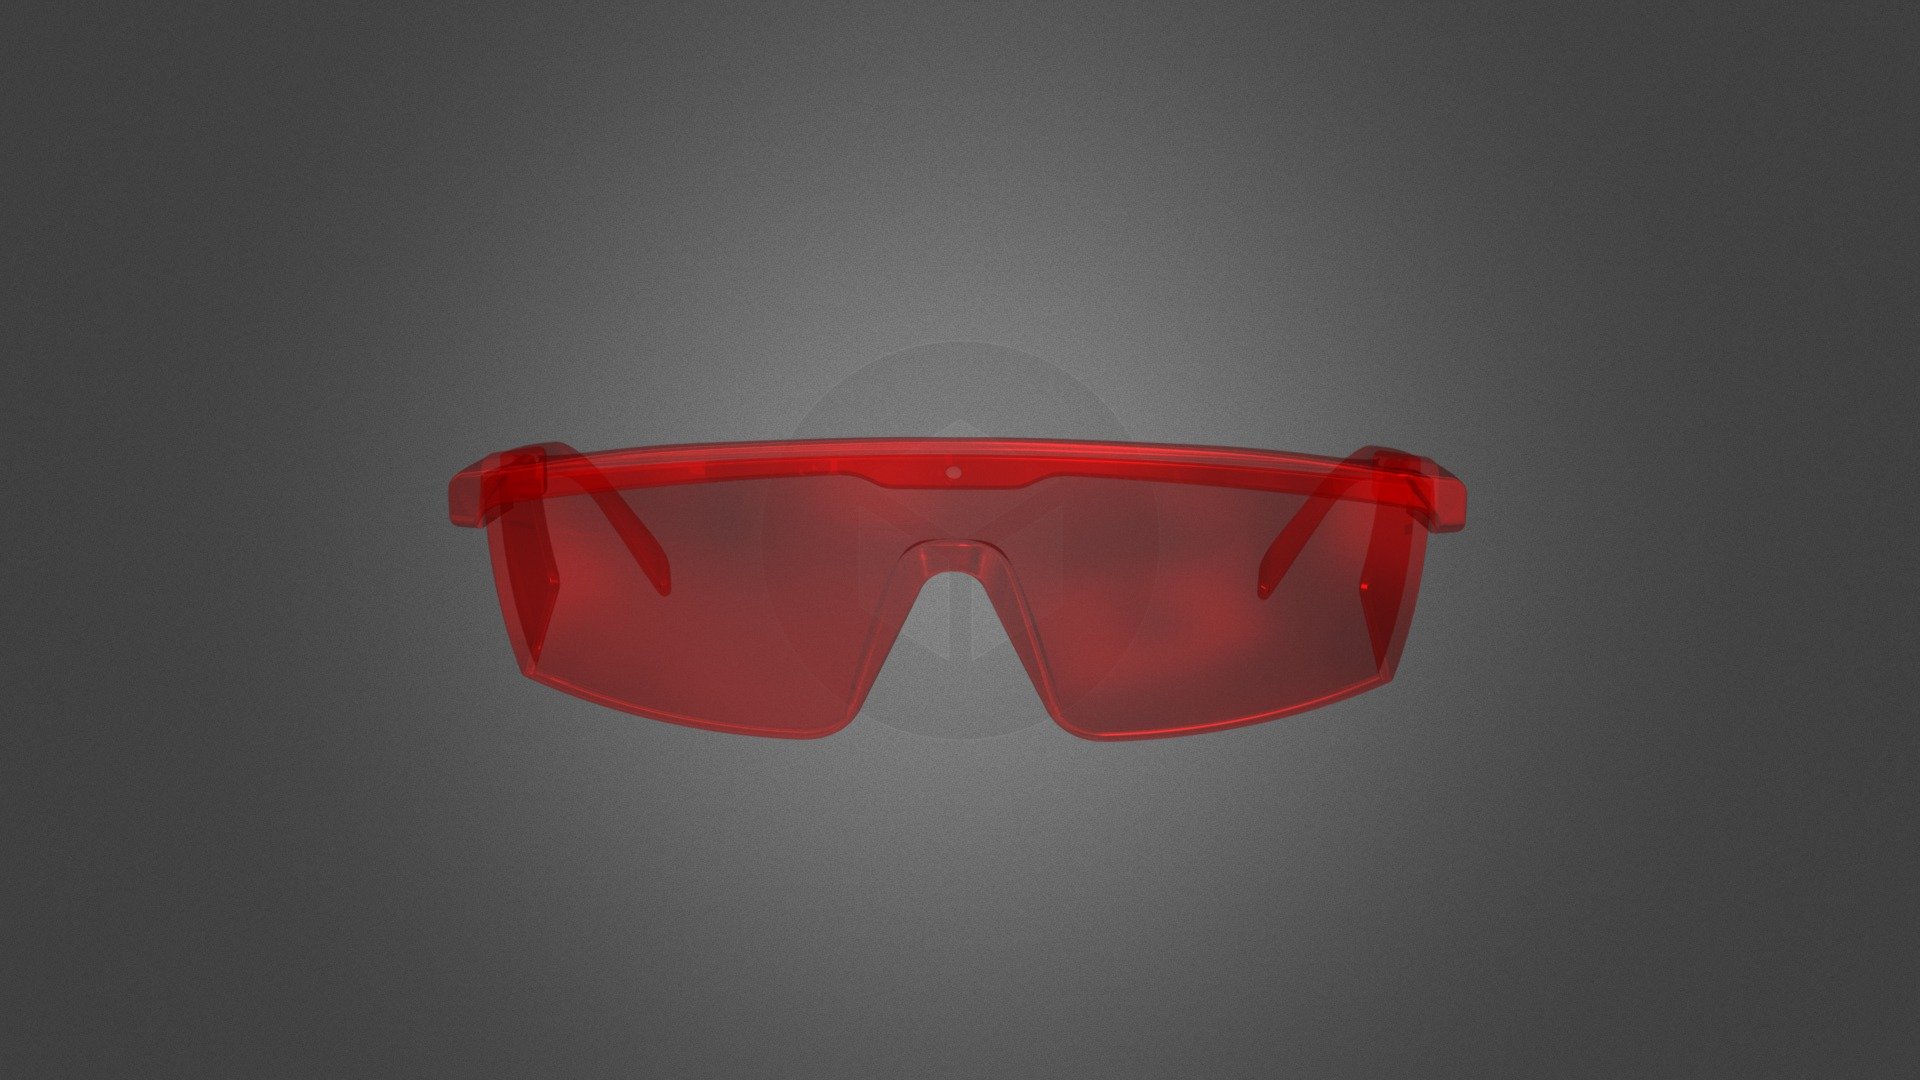 Goggles for 3D modelling and design. This needs a connection piece which can be used to adjust the stick length. 
Free size model that can be used for mold making 3d model